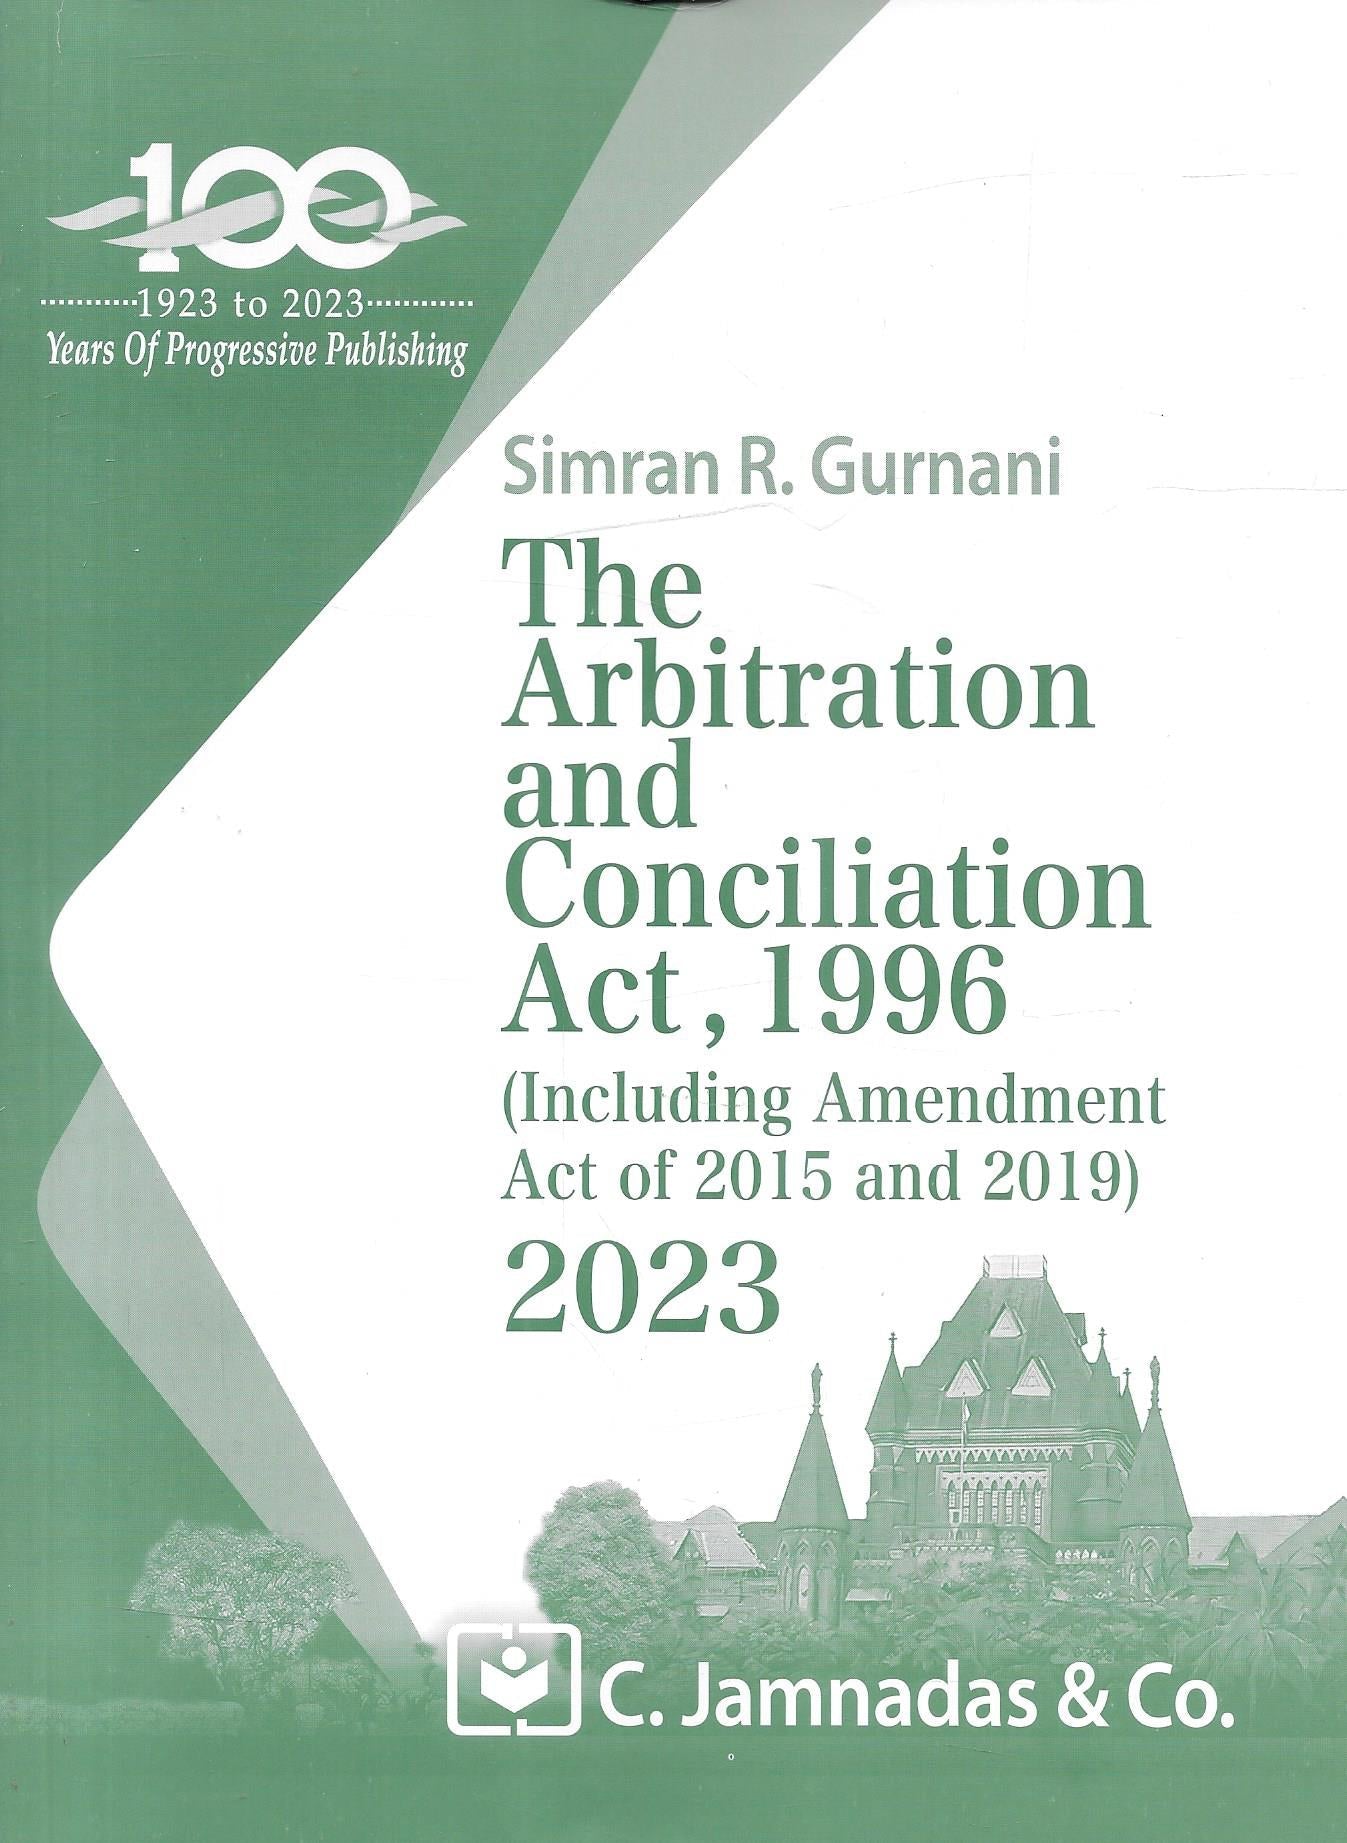 The Arbitration and Conciliation Act, 1996 - The Jhabvala Series